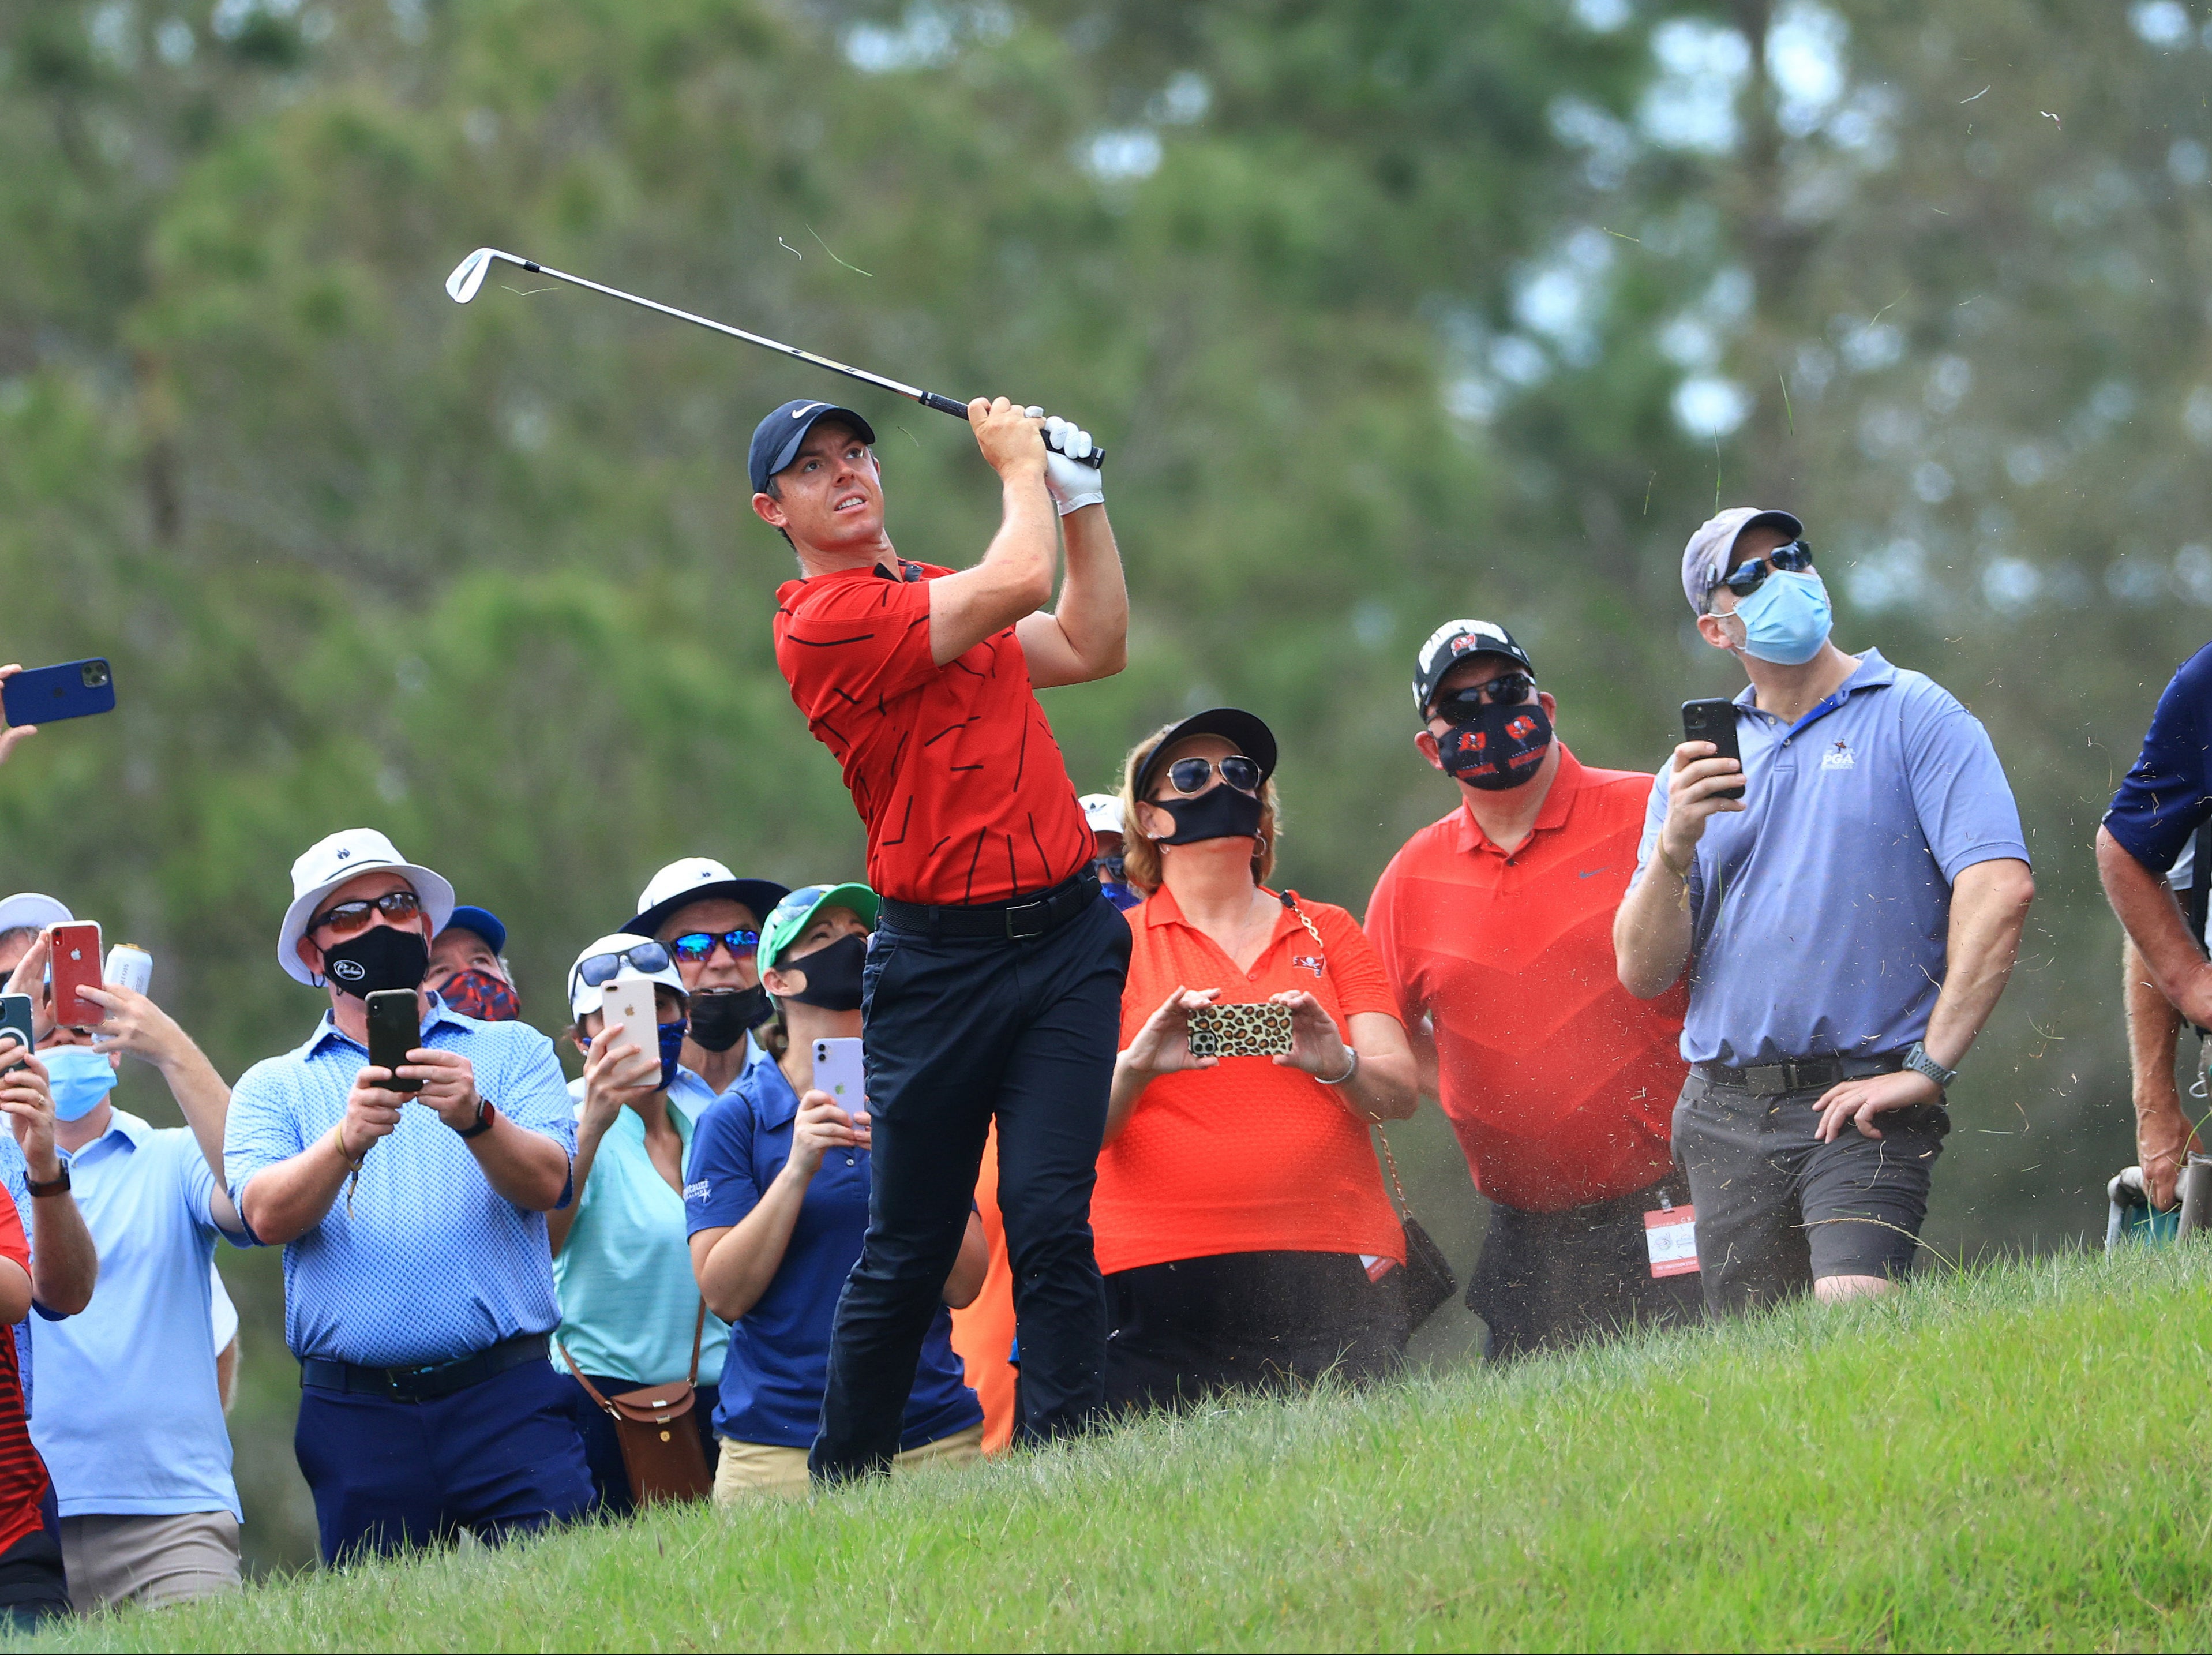 Rory McIlroy plays an approach shot at The Concession in Florida